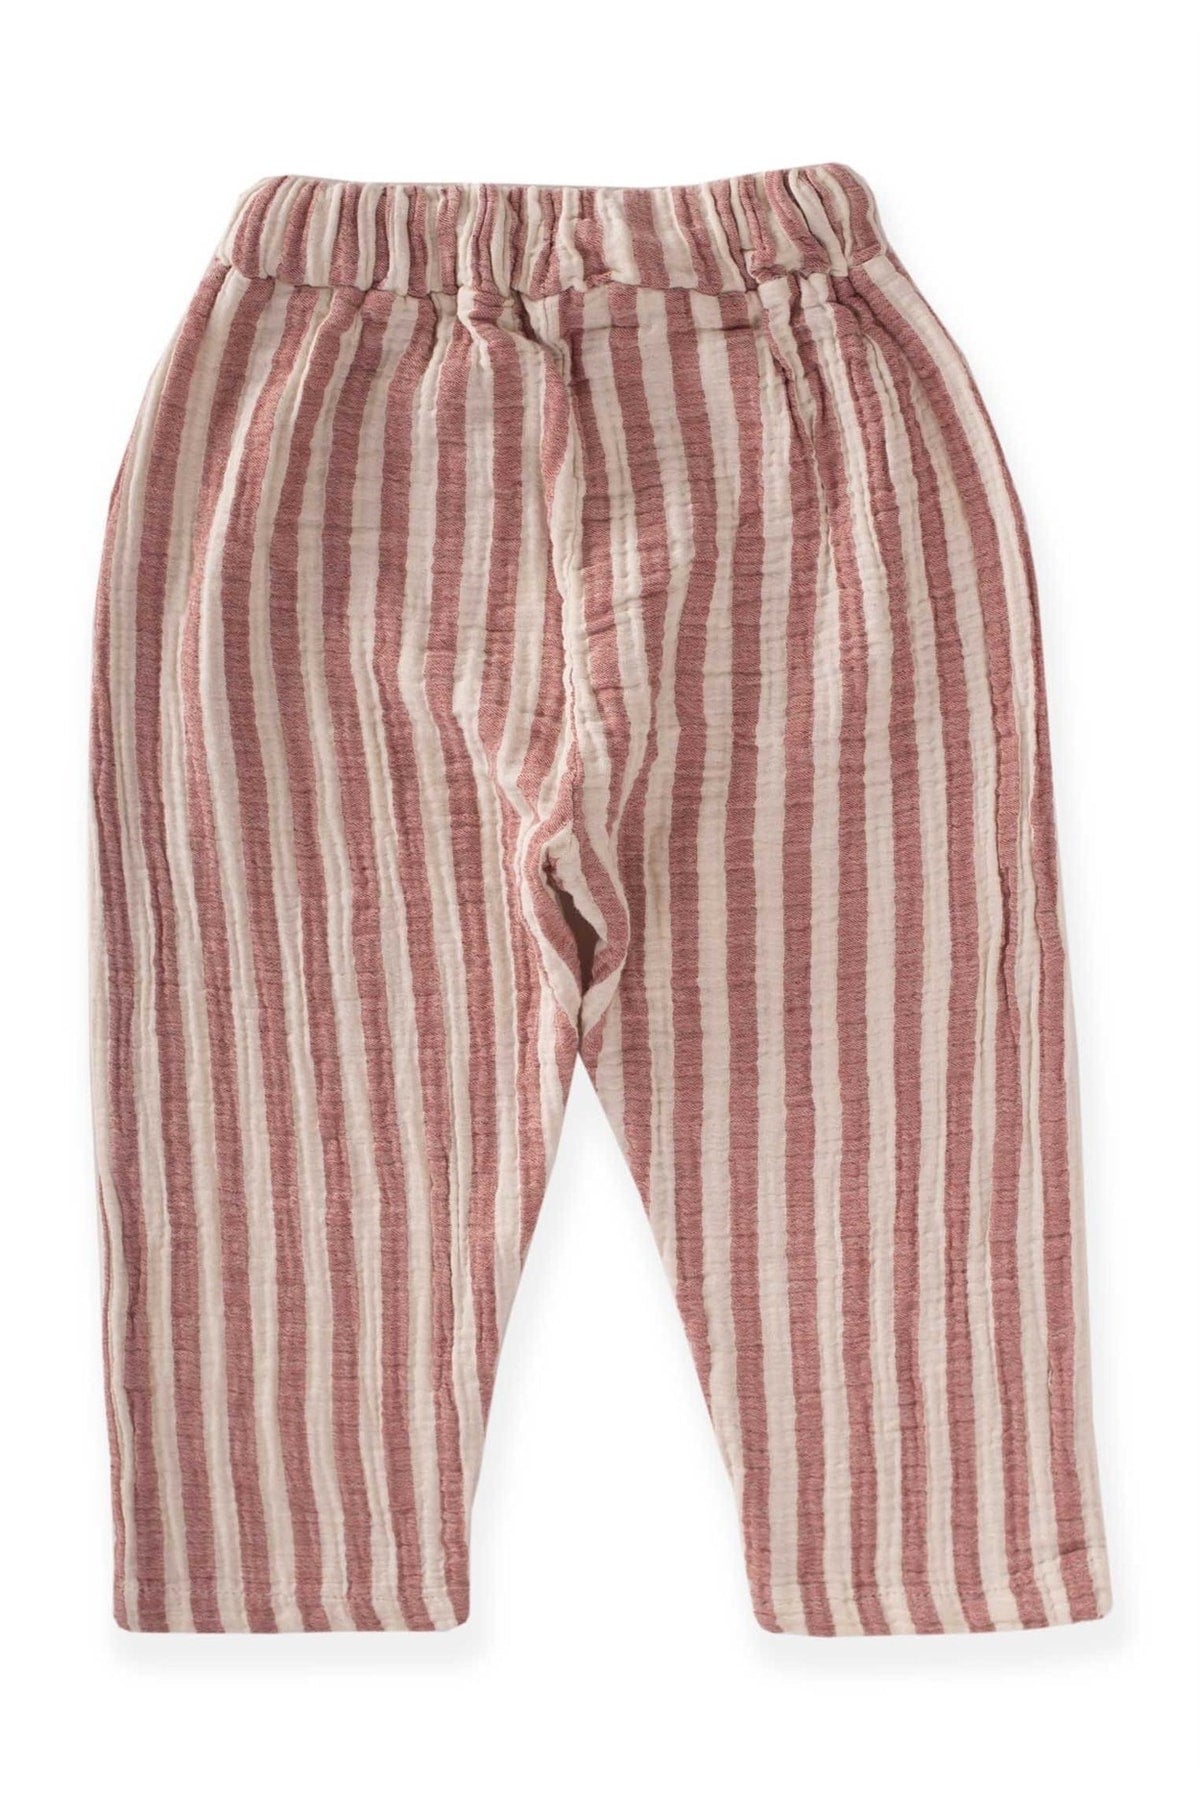 Müslin Trousers Red striped